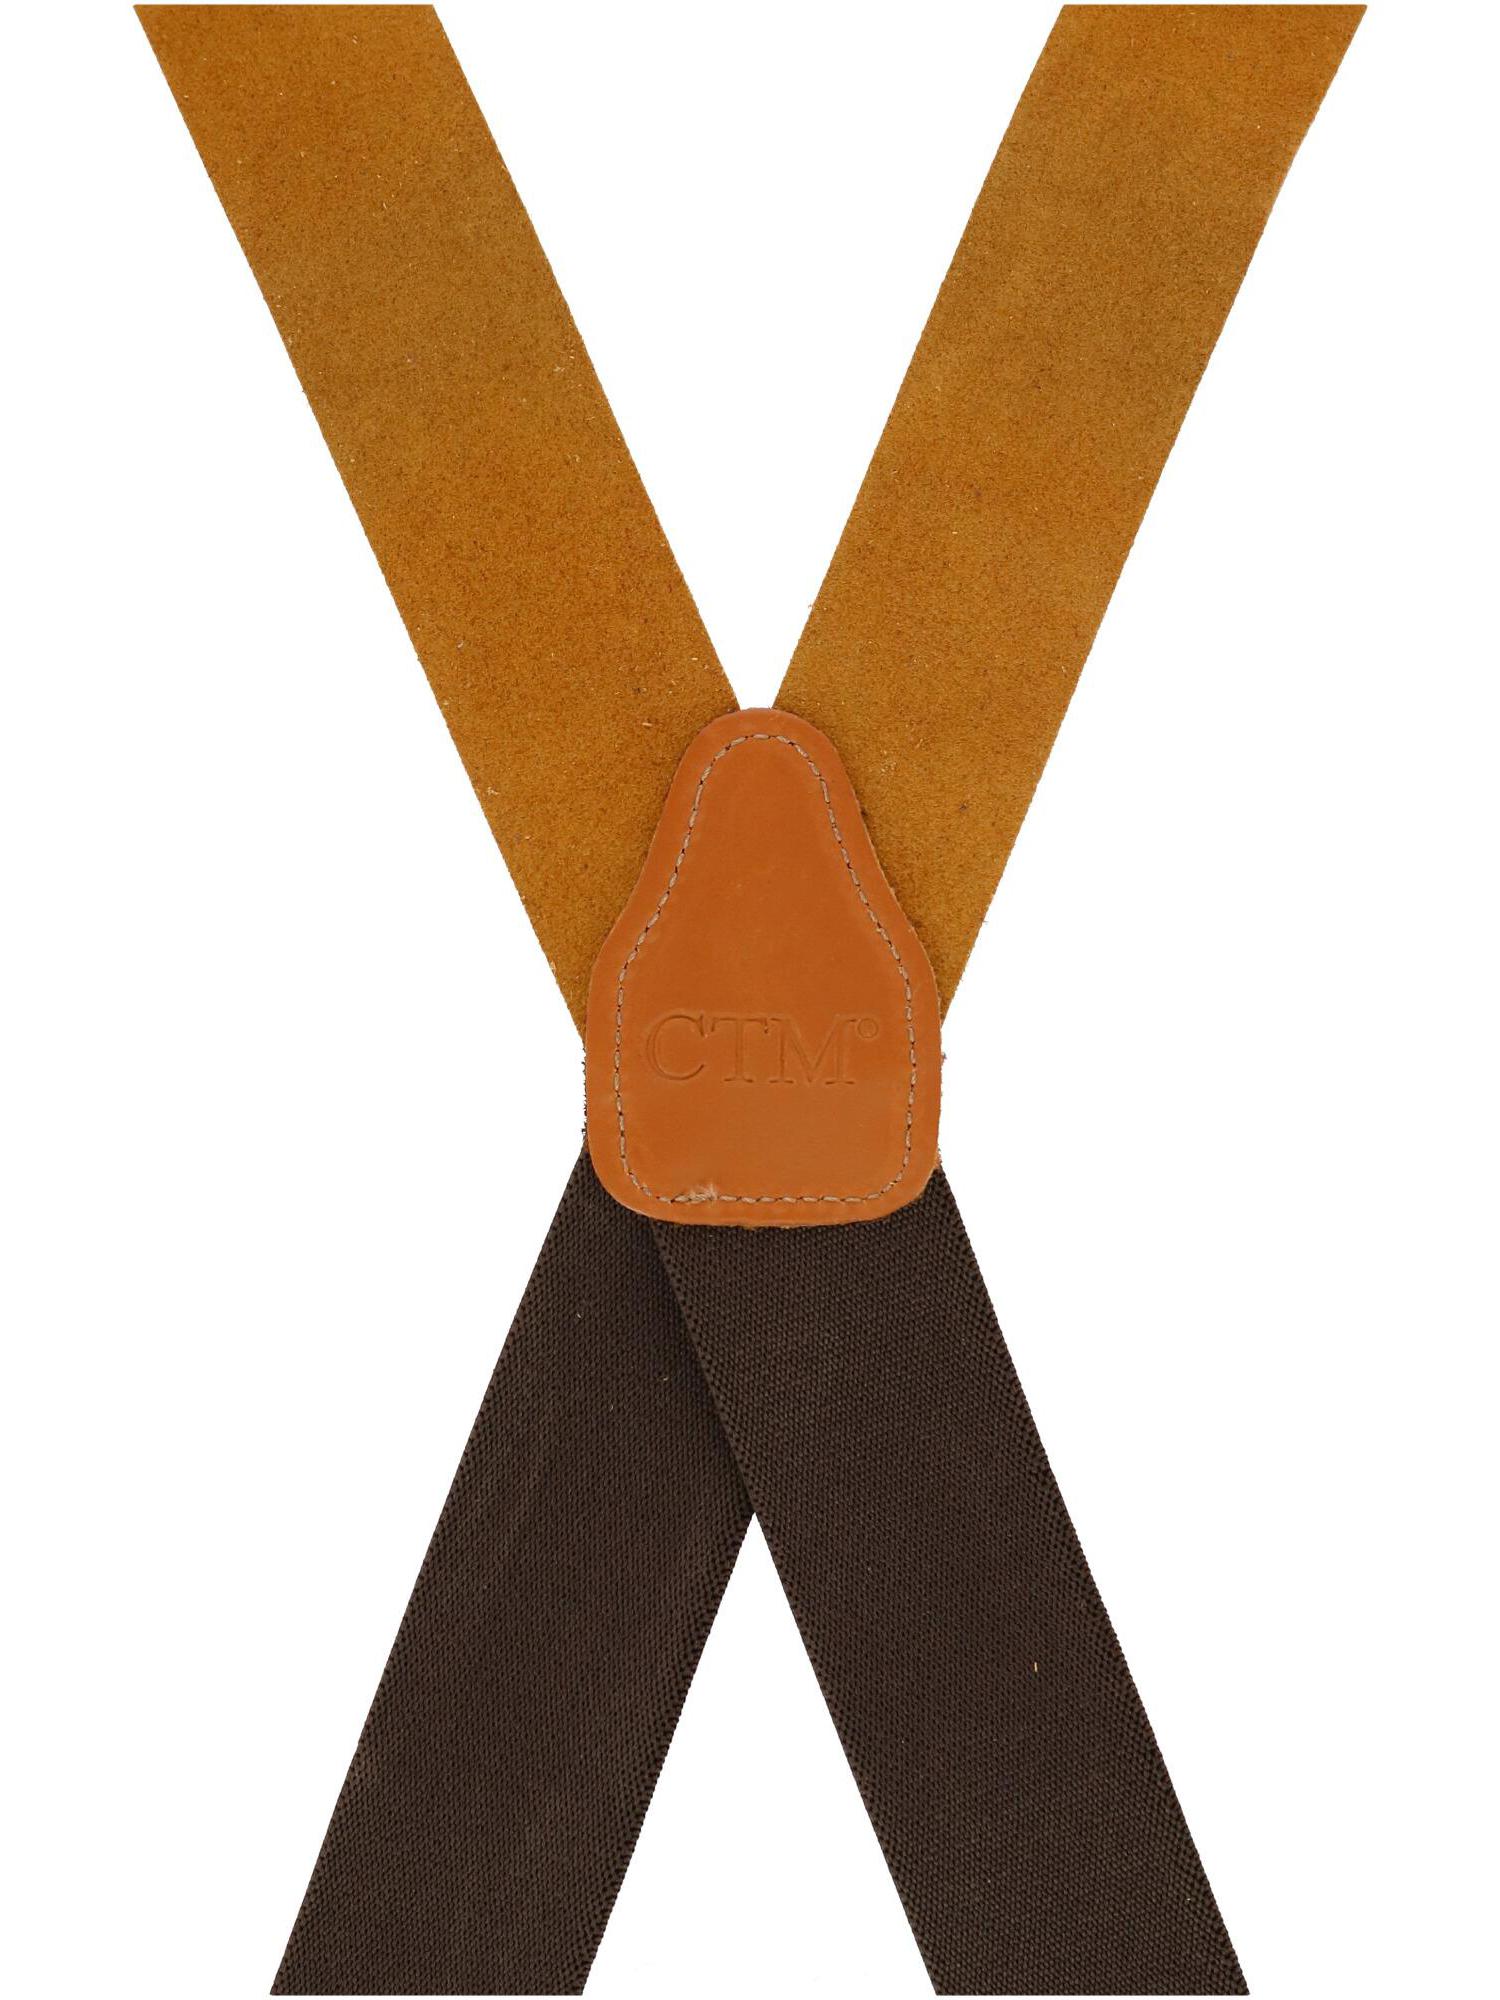 CTM  Smooth Coated Leather Wide Width Suspenders with Metal Swivel Hook Ends - image 2 of 4